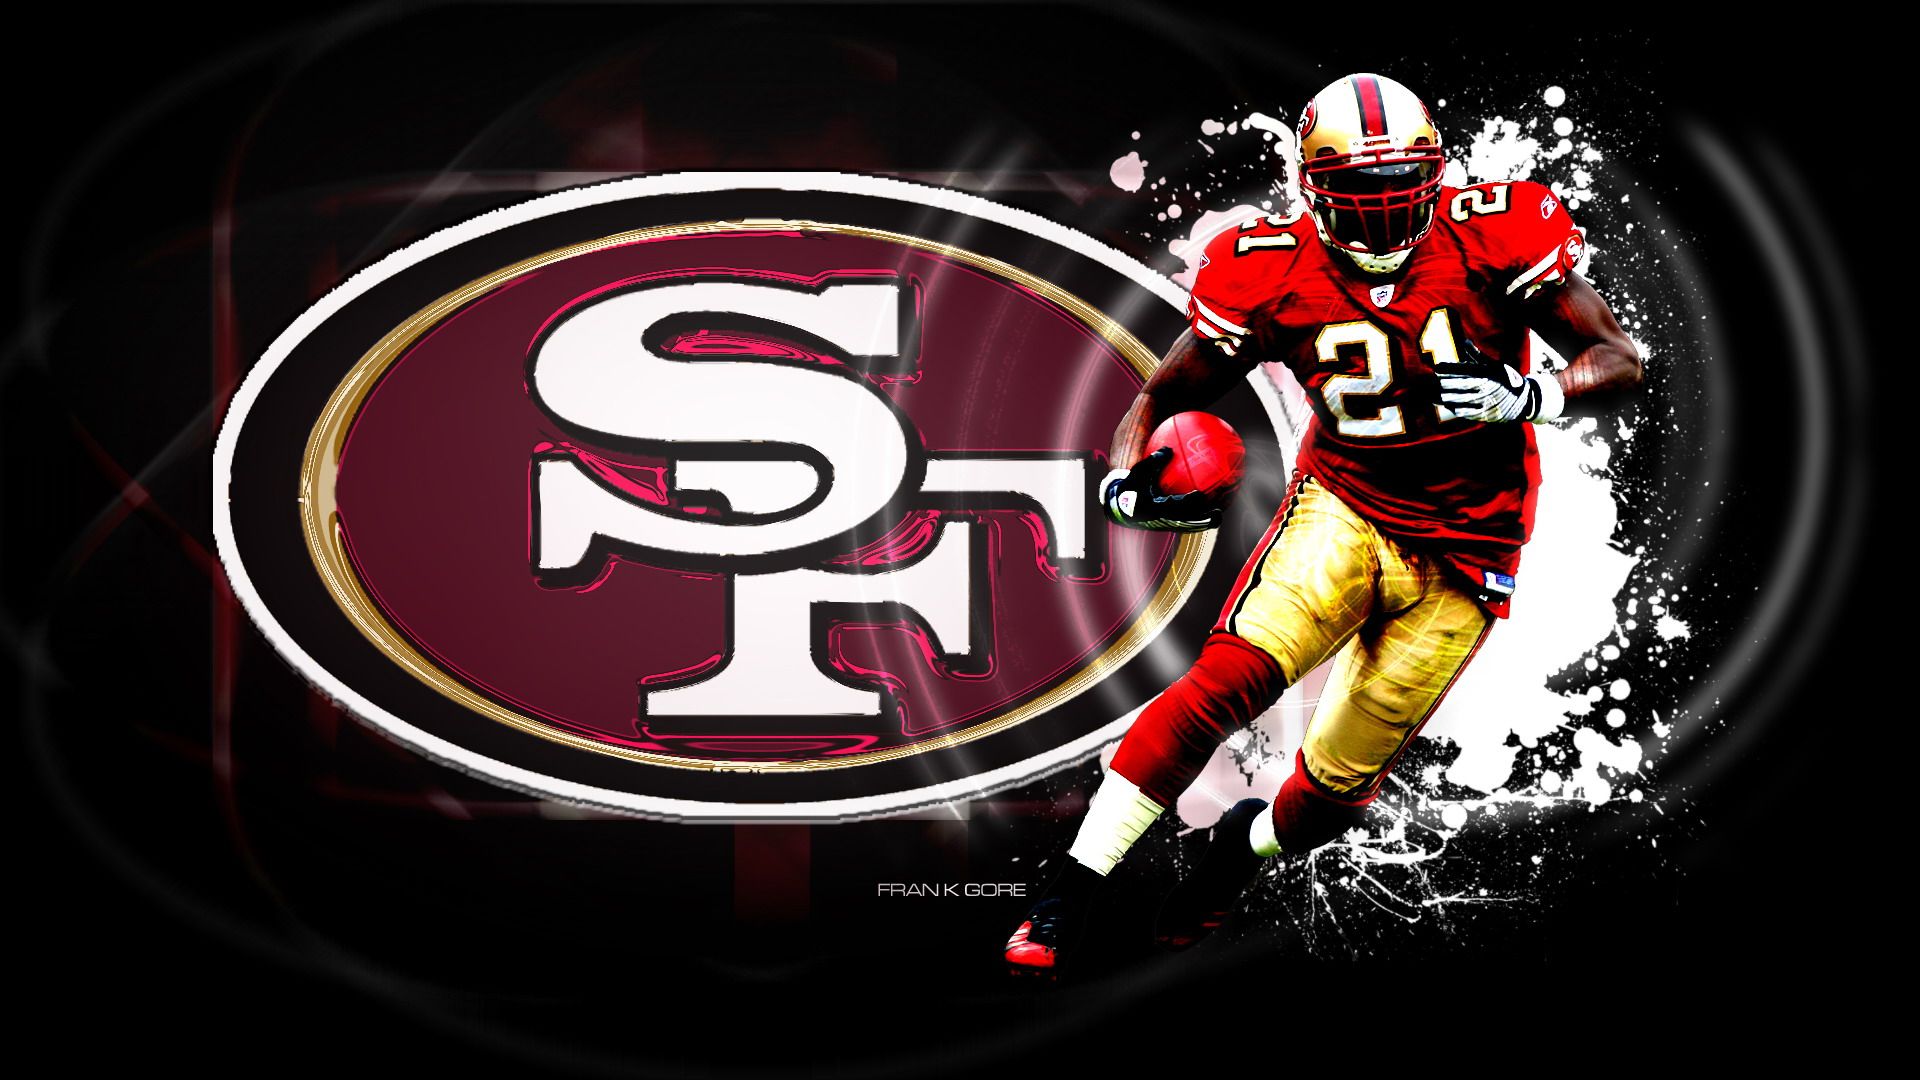  Frank Gore Rushing Leader all time yards San